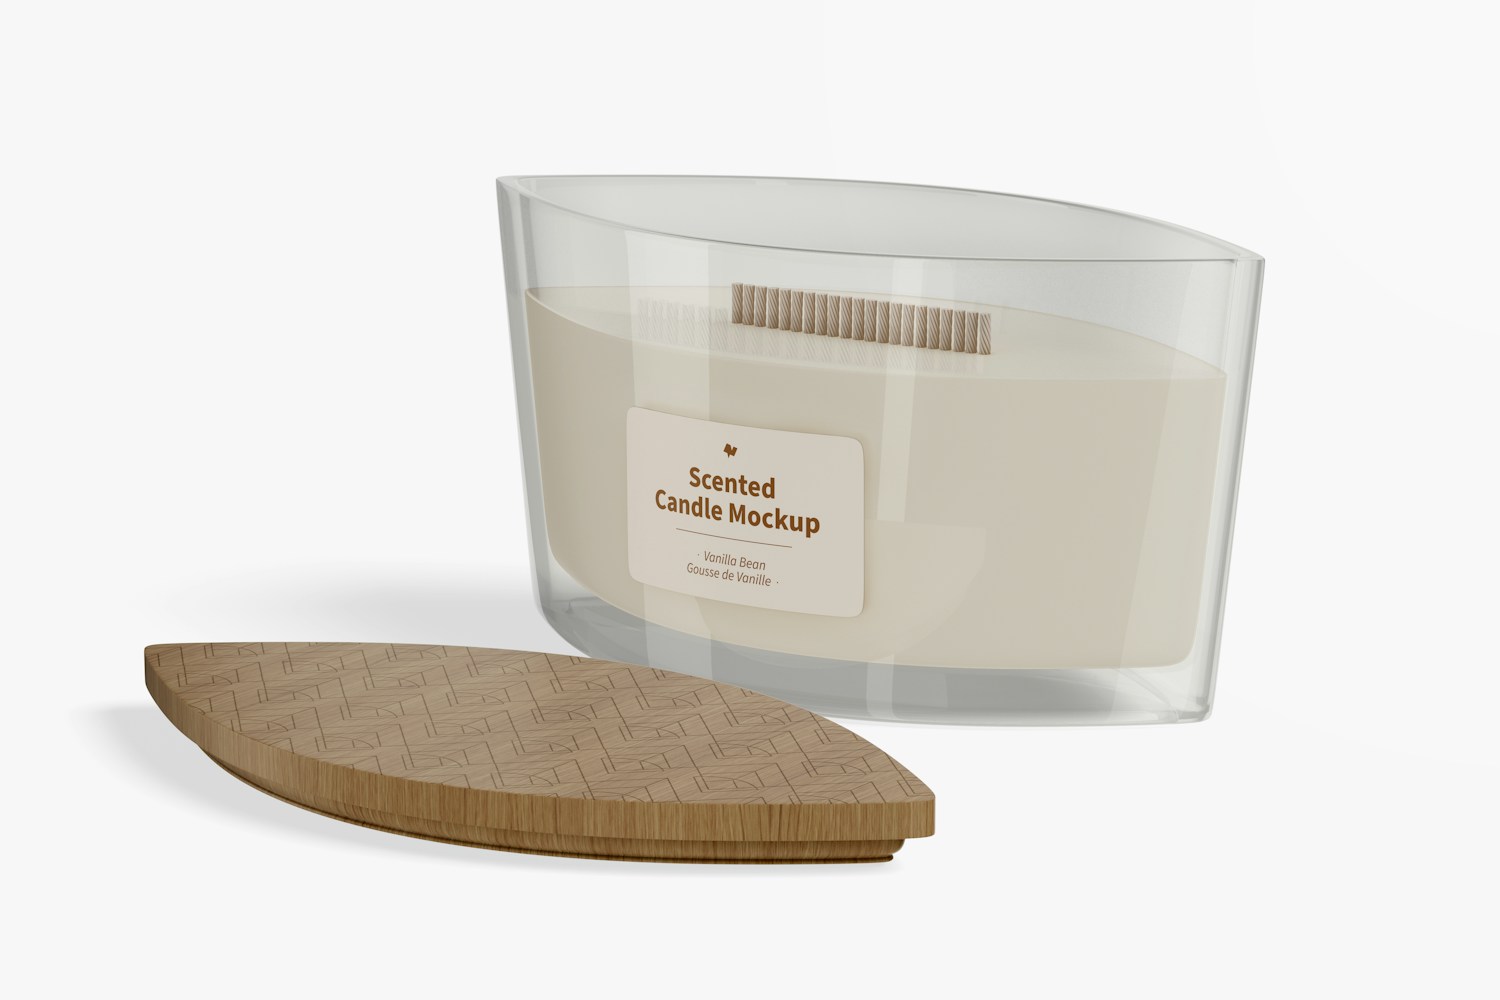 Scented Candle Mockup, Side View